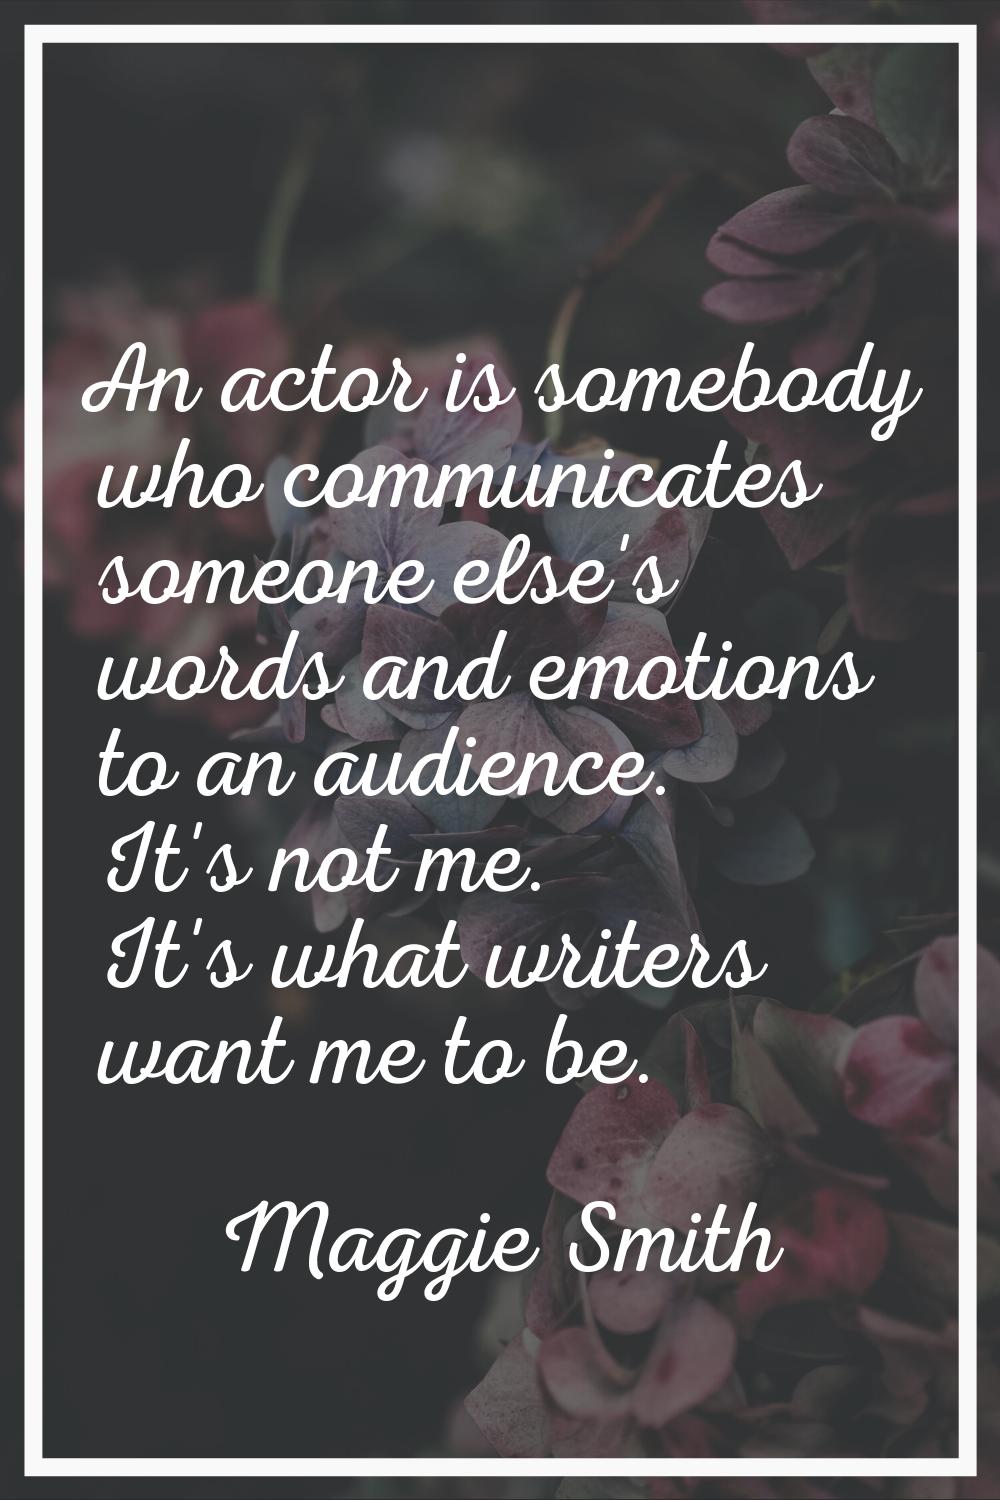 An actor is somebody who communicates someone else's words and emotions to an audience. It's not me